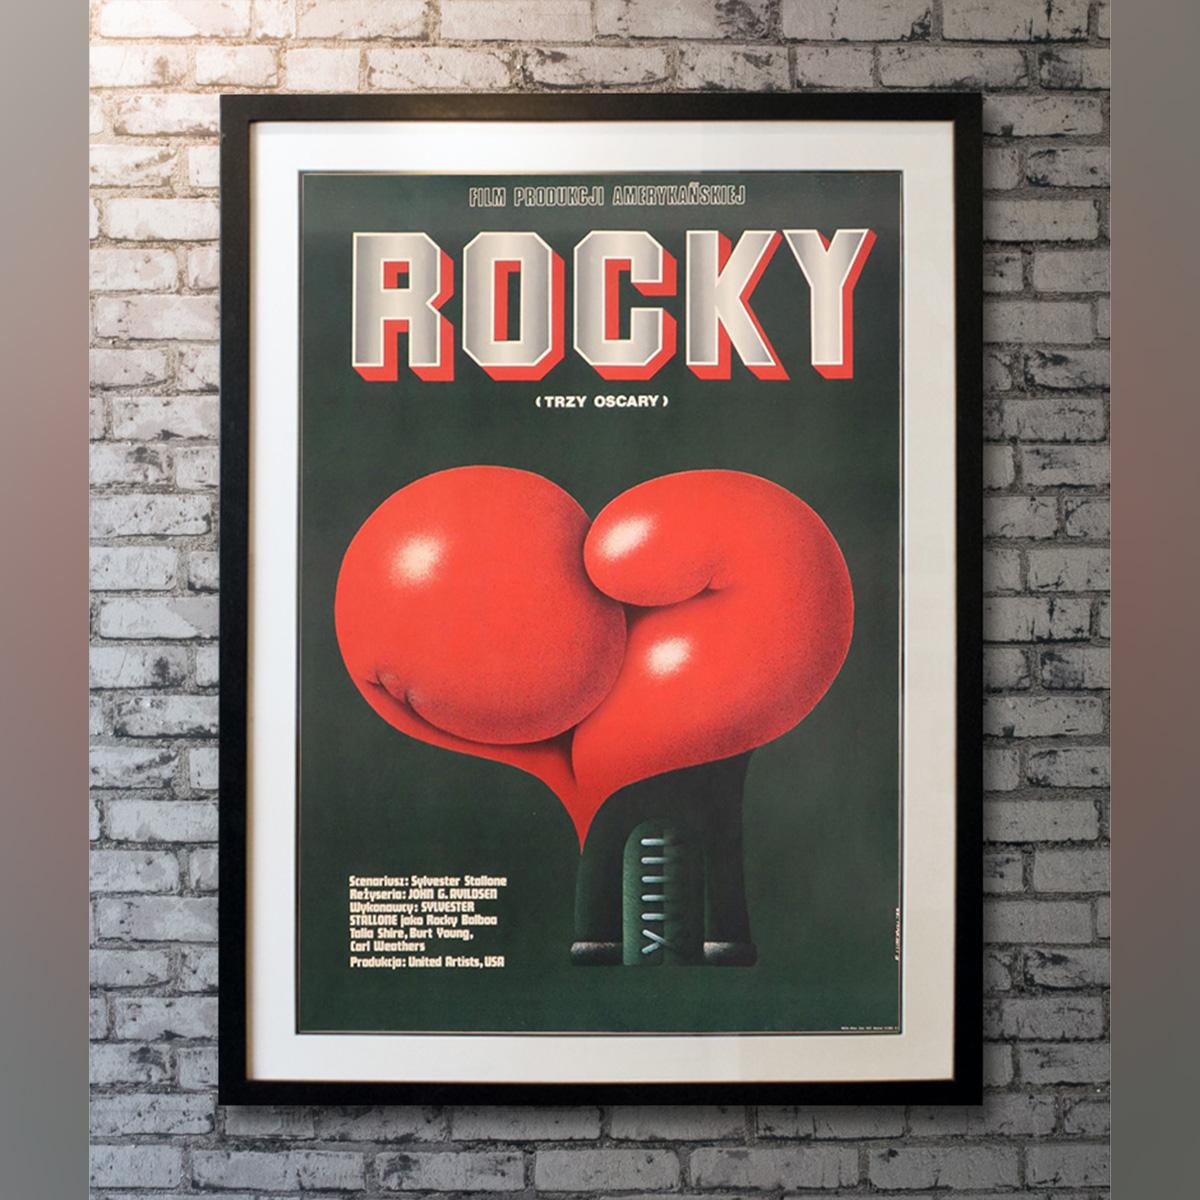 Polish Film Poster designed by Edward Lutczyn for the film that made Stallone an icon and spawned five sequels. A small time boxer gets a once in a lifetime chance to fight the heavyweight champ in a bout in which he strives to go the distance for